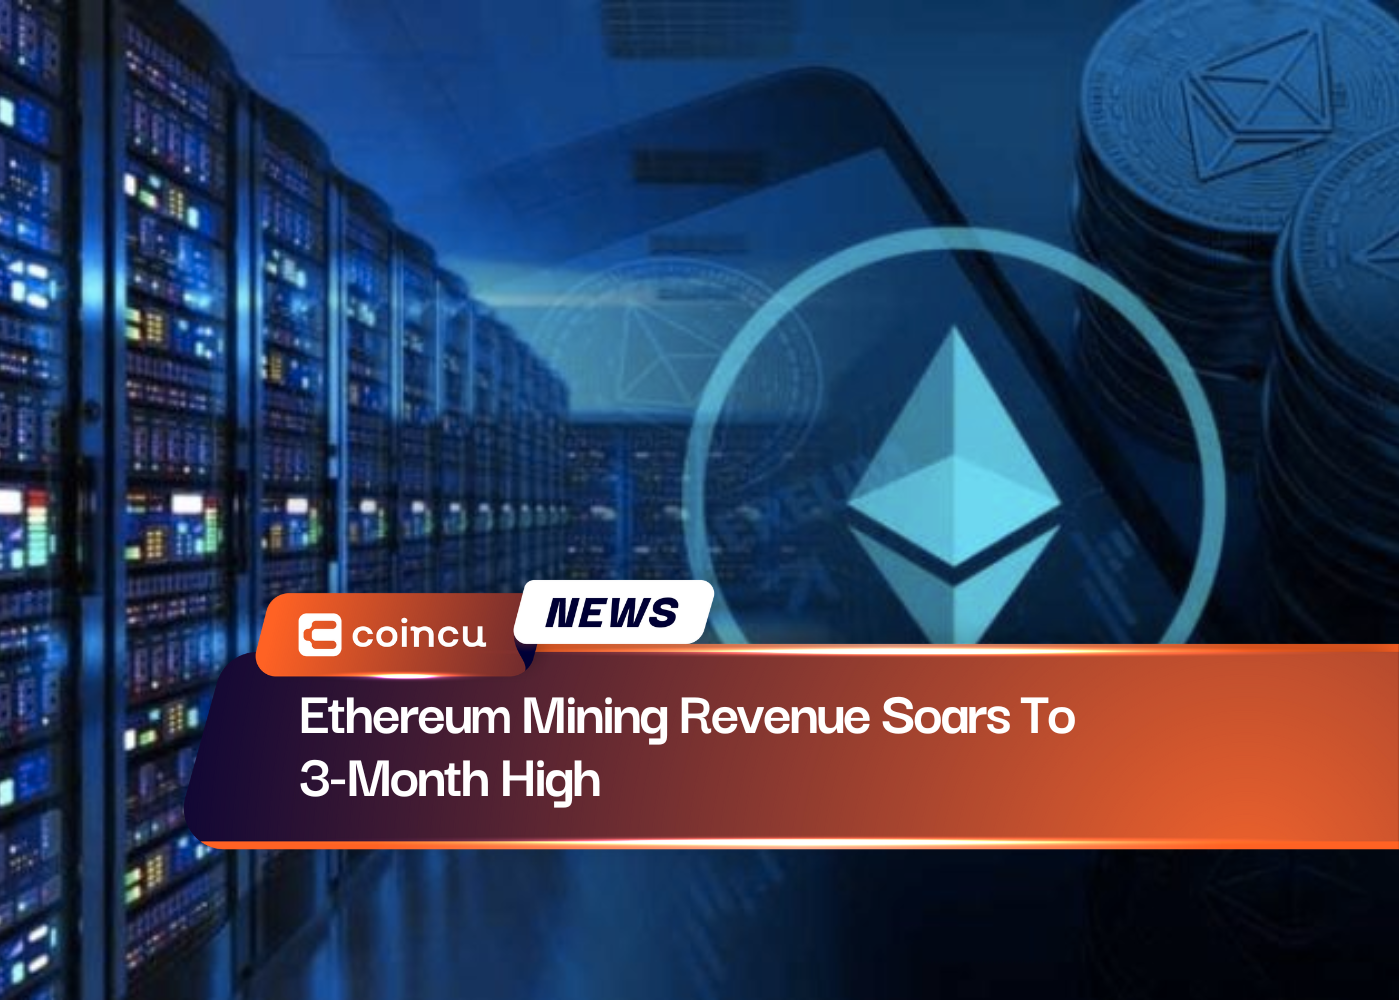 Ethereum Mining Revenue Soars To 3-Month High